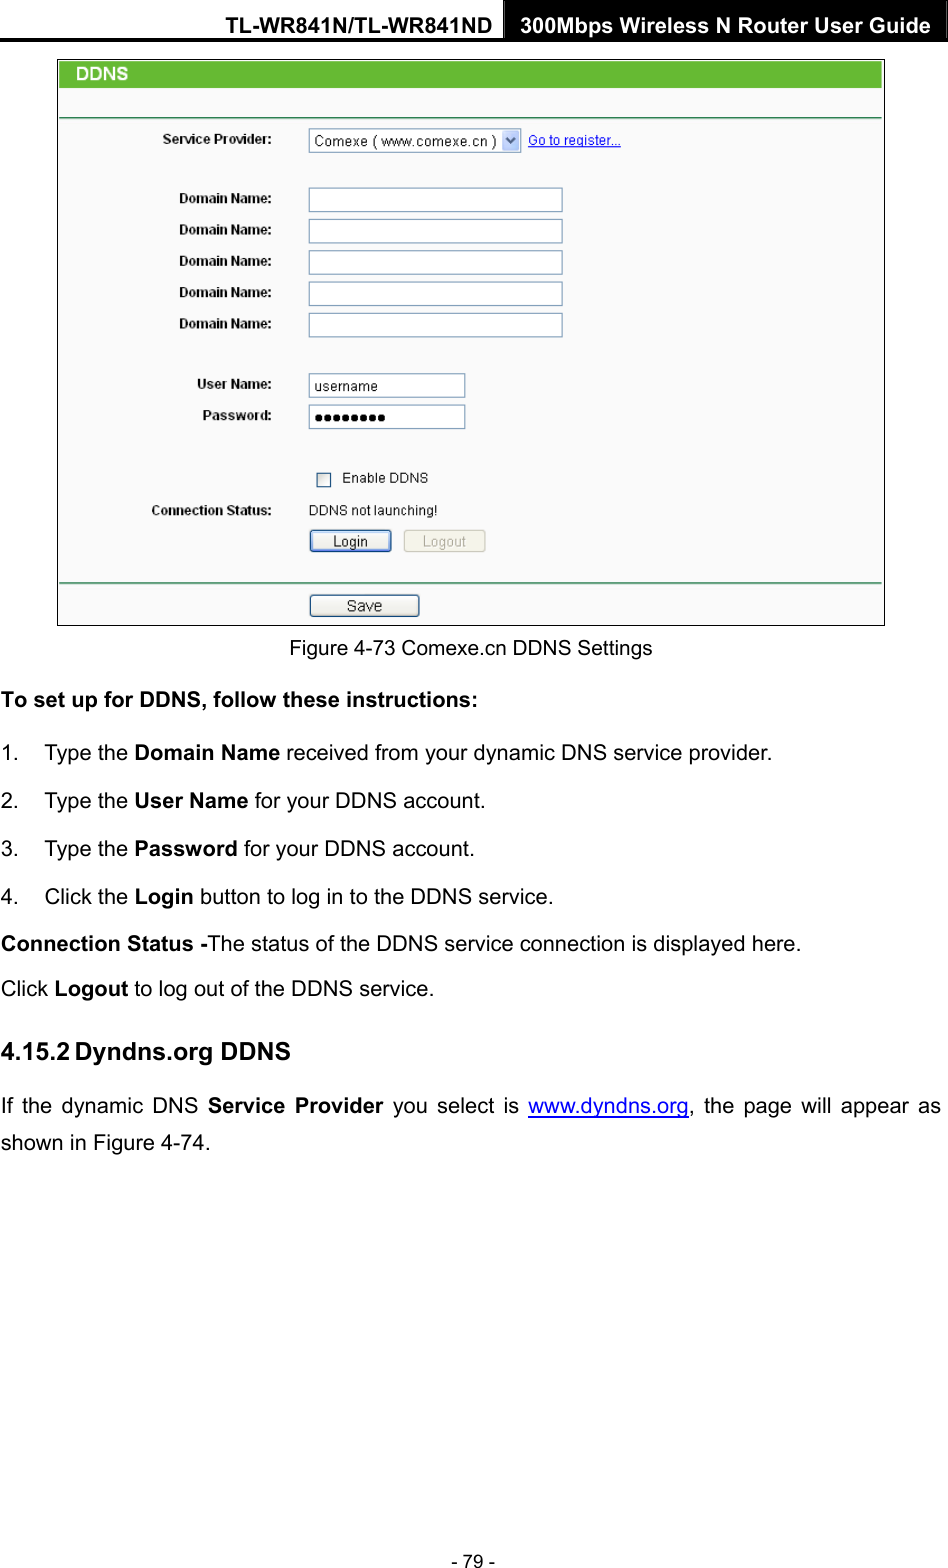 TL-WR841N/TL-WR841ND 300Mbps Wireless N Router User Guide - 79 -  Figure 4-73 Comexe.cn DDNS Settings To set up for DDNS, follow these instructions: 1. Type the Domain Name received from your dynamic DNS service provider.     2. Type the User Name for your DDNS account.   3. Type the Password for your DDNS account.   4. Click the Login button to log in to the DDNS service. Connection Status -The status of the DDNS service connection is displayed here. Click Logout to log out of the DDNS service.   4.15.2 Dyndns.org DDNS If the dynamic DNS Service Provider you select is www.dyndns.org, the page will appear as shown in Figure 4-74. 